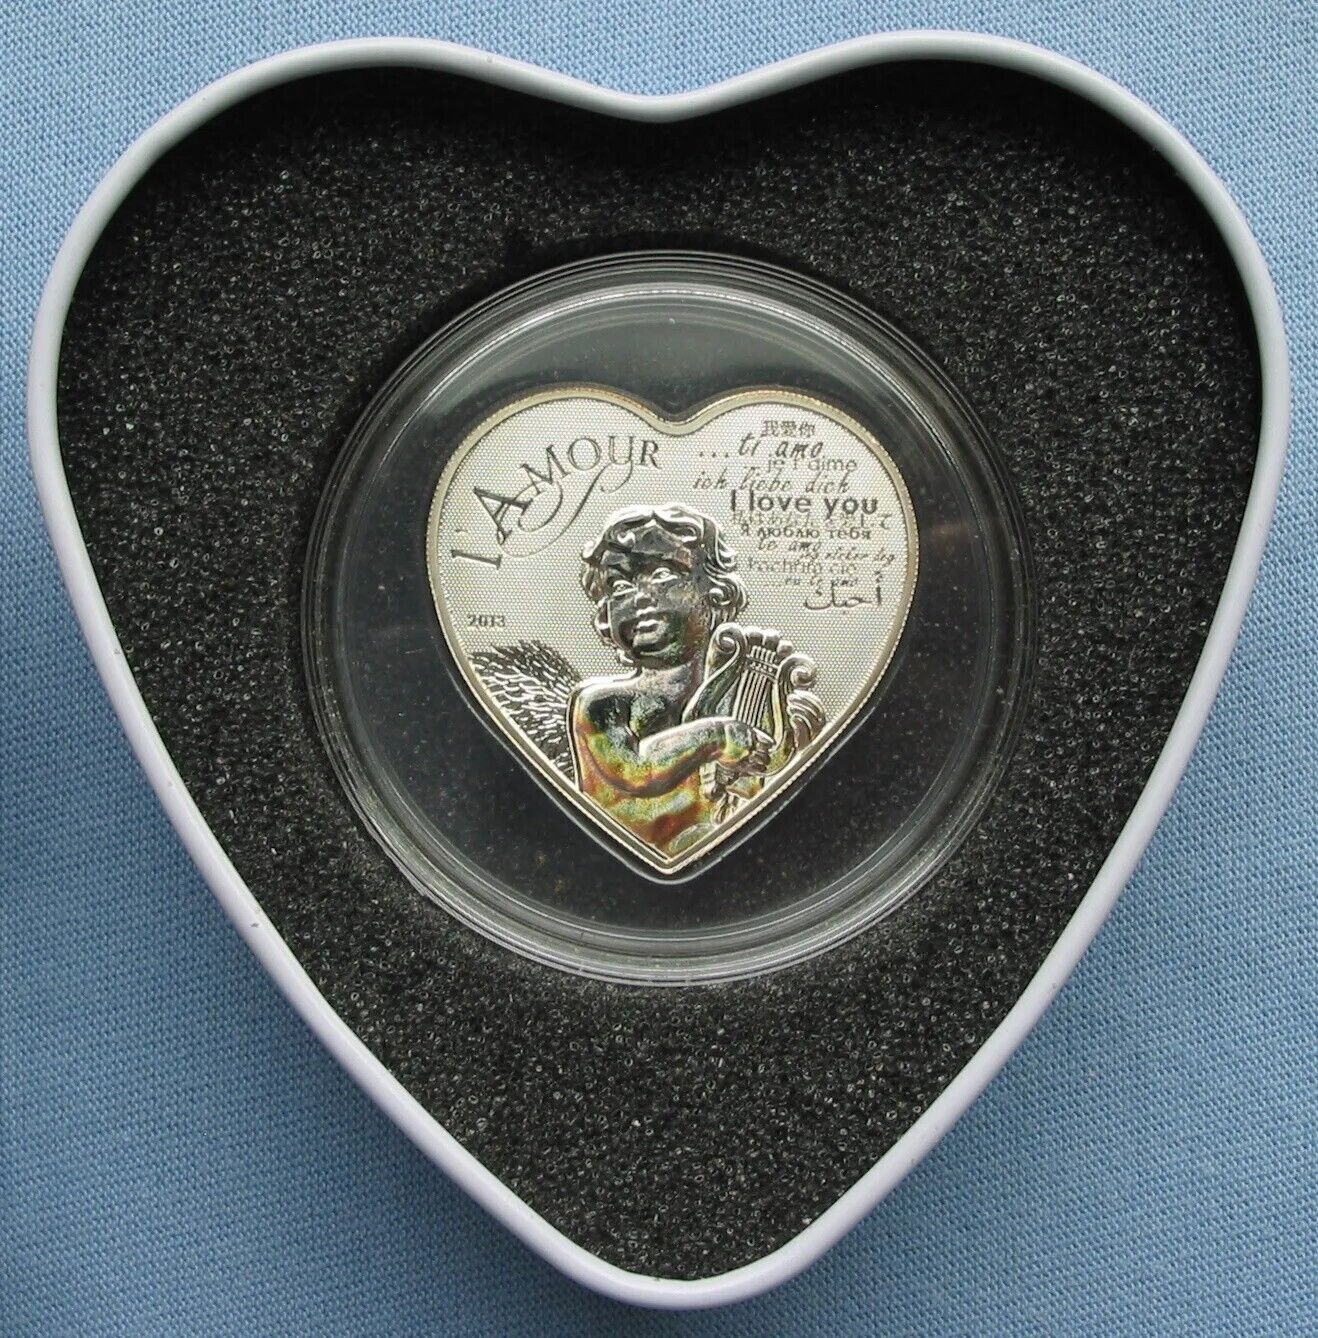 20g Silver Coin 2013 Cameroon 1000 Francs L'Amour Heart of Love Hologram Angel-classypw.com-12